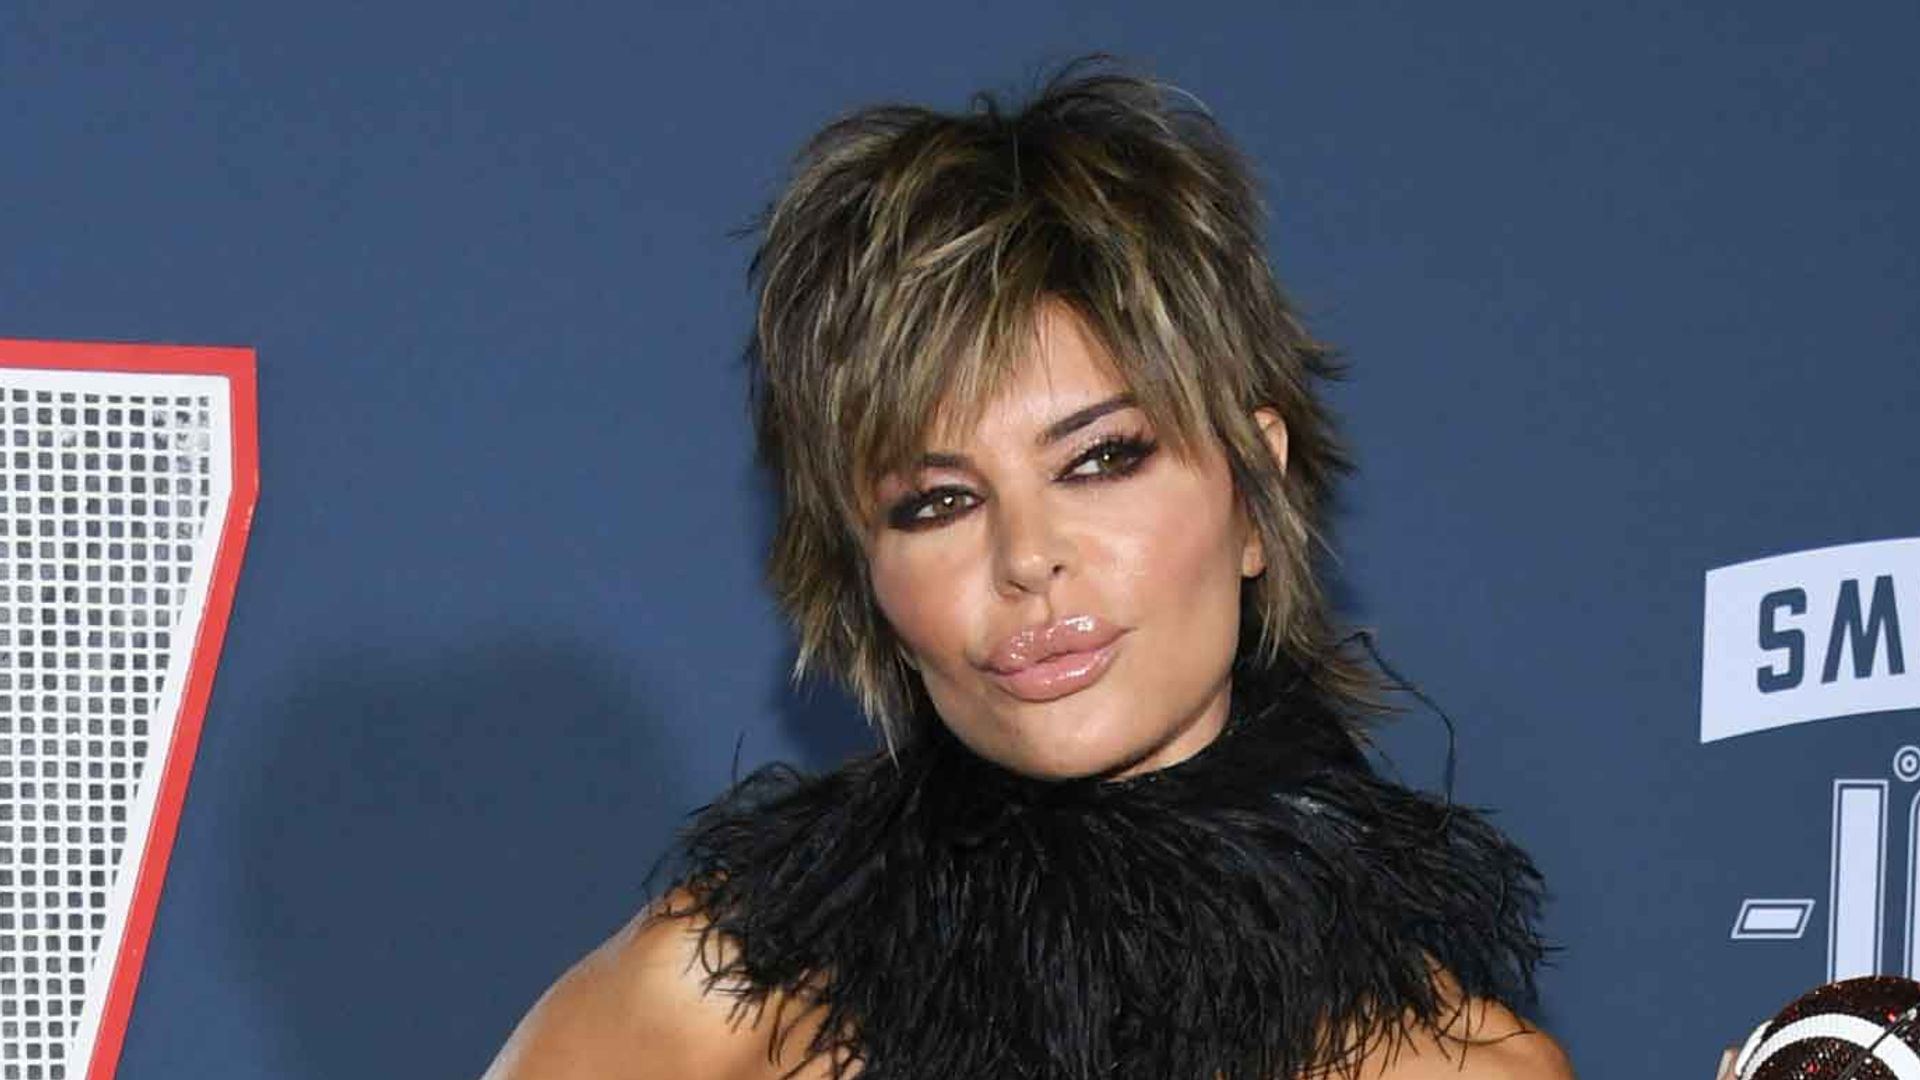 Lisa Rinna at the 80 for Brady premiere